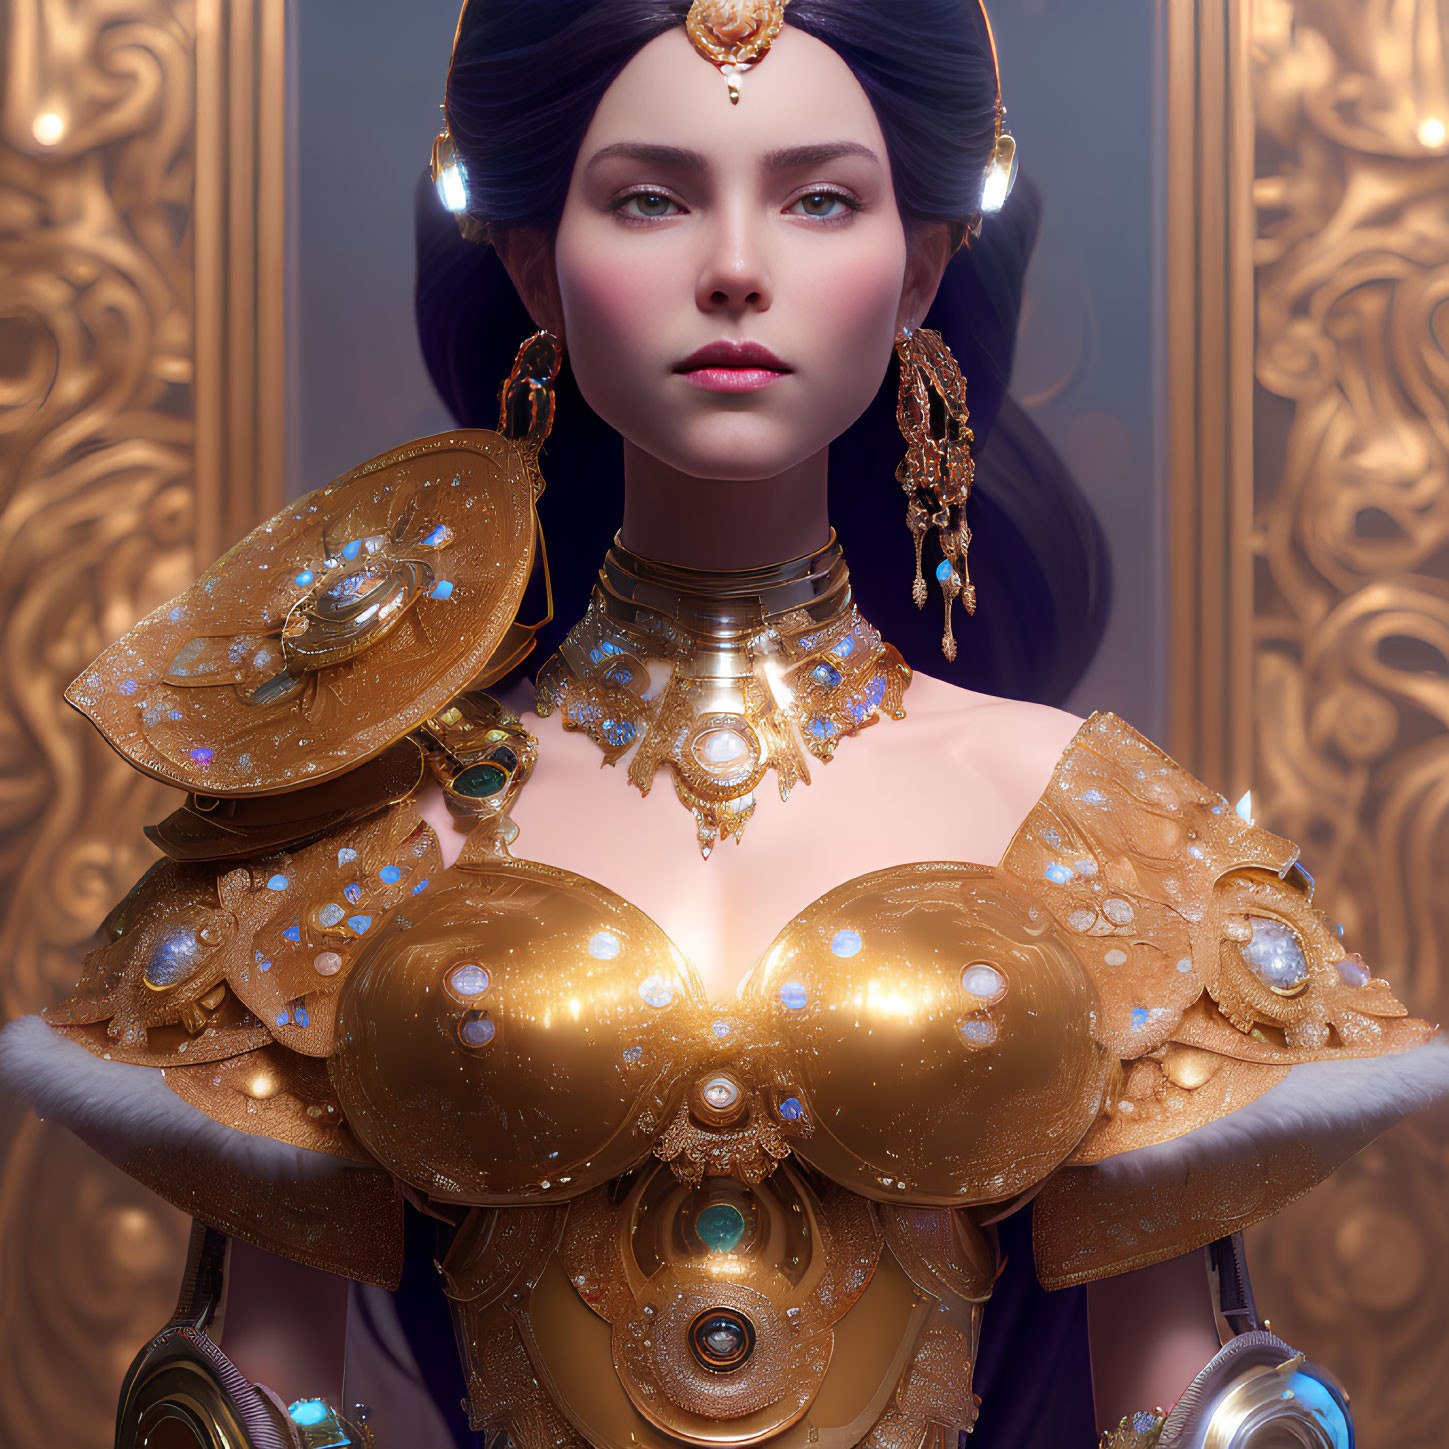 Detailed female character in gold armor with regal accessories on mirrored background